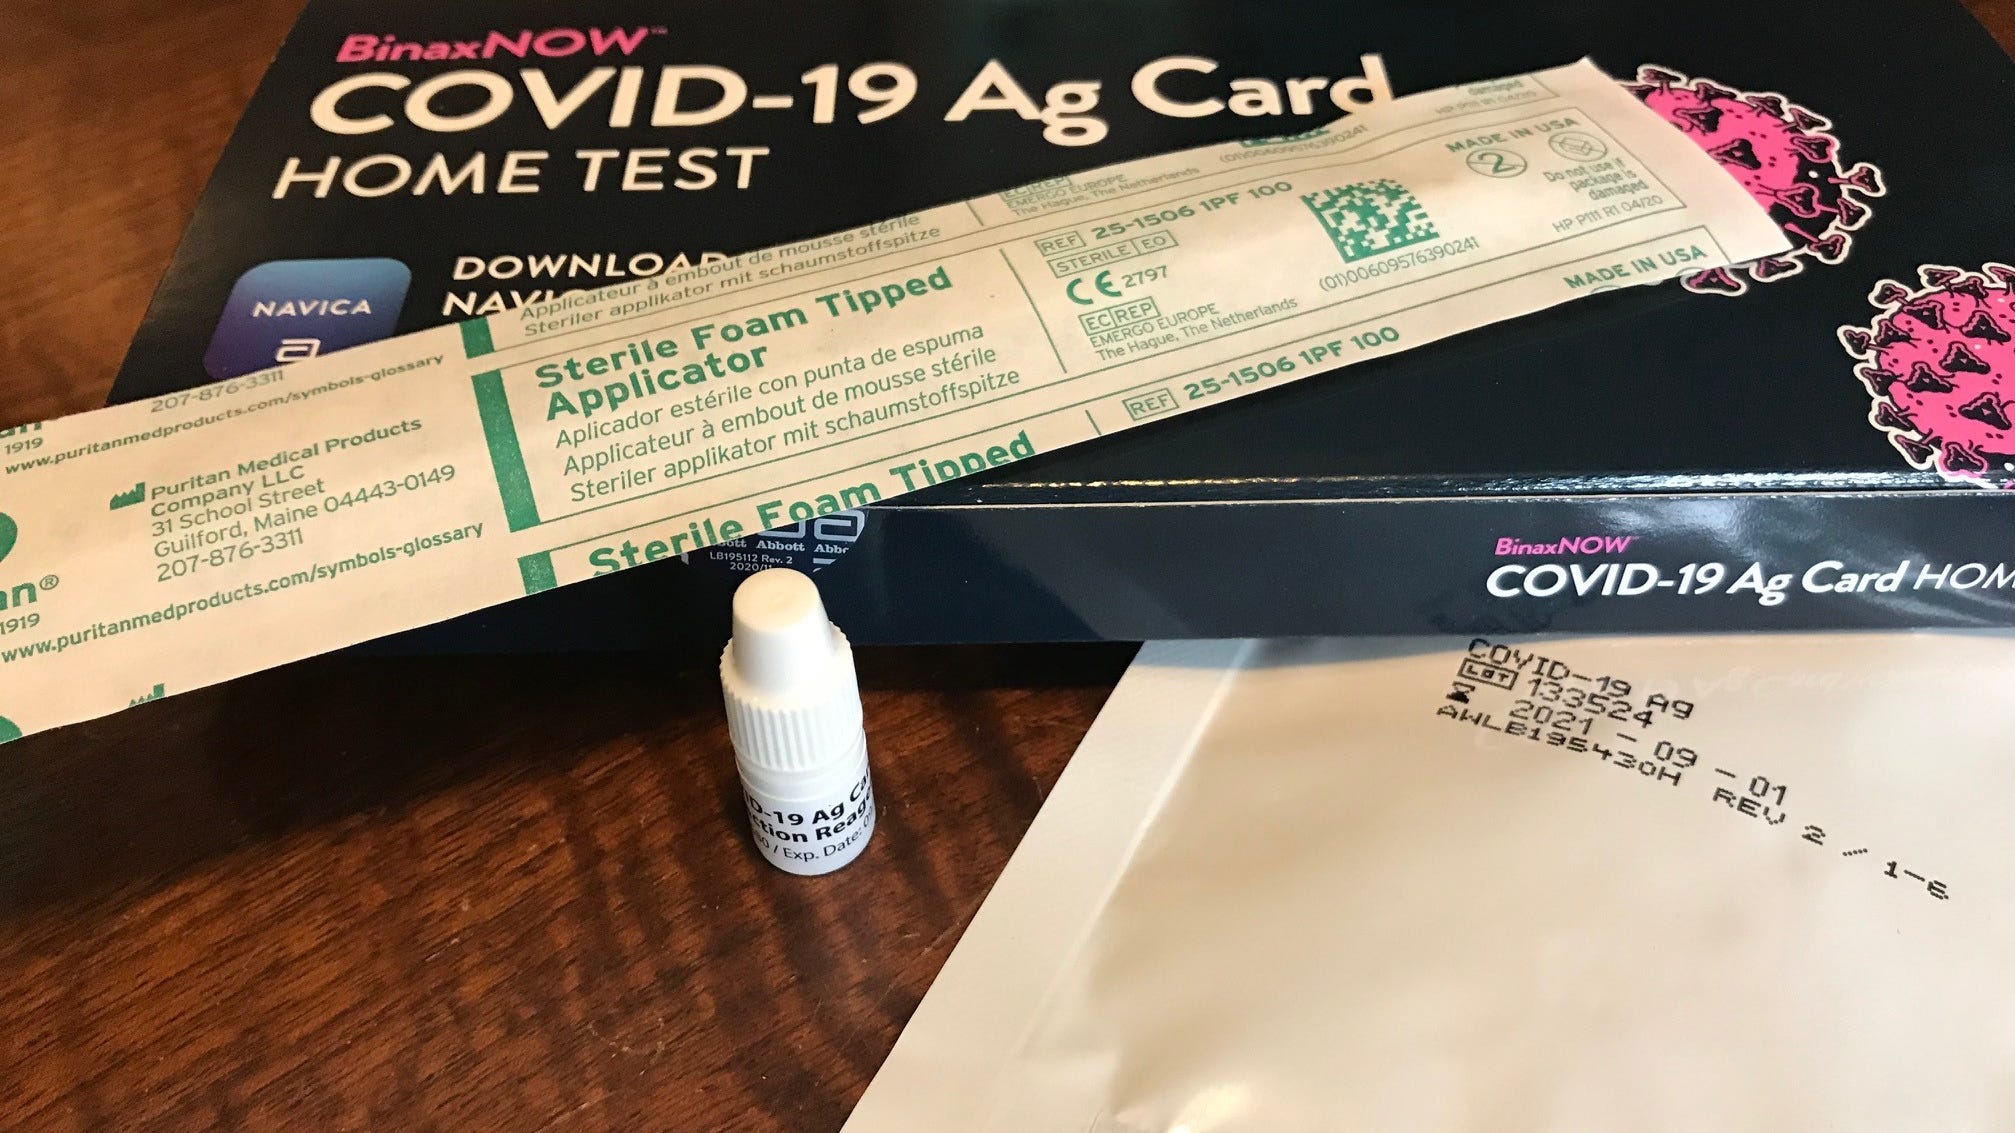 Free, athome COVID19 test kits 'one more tool' in fight against virus